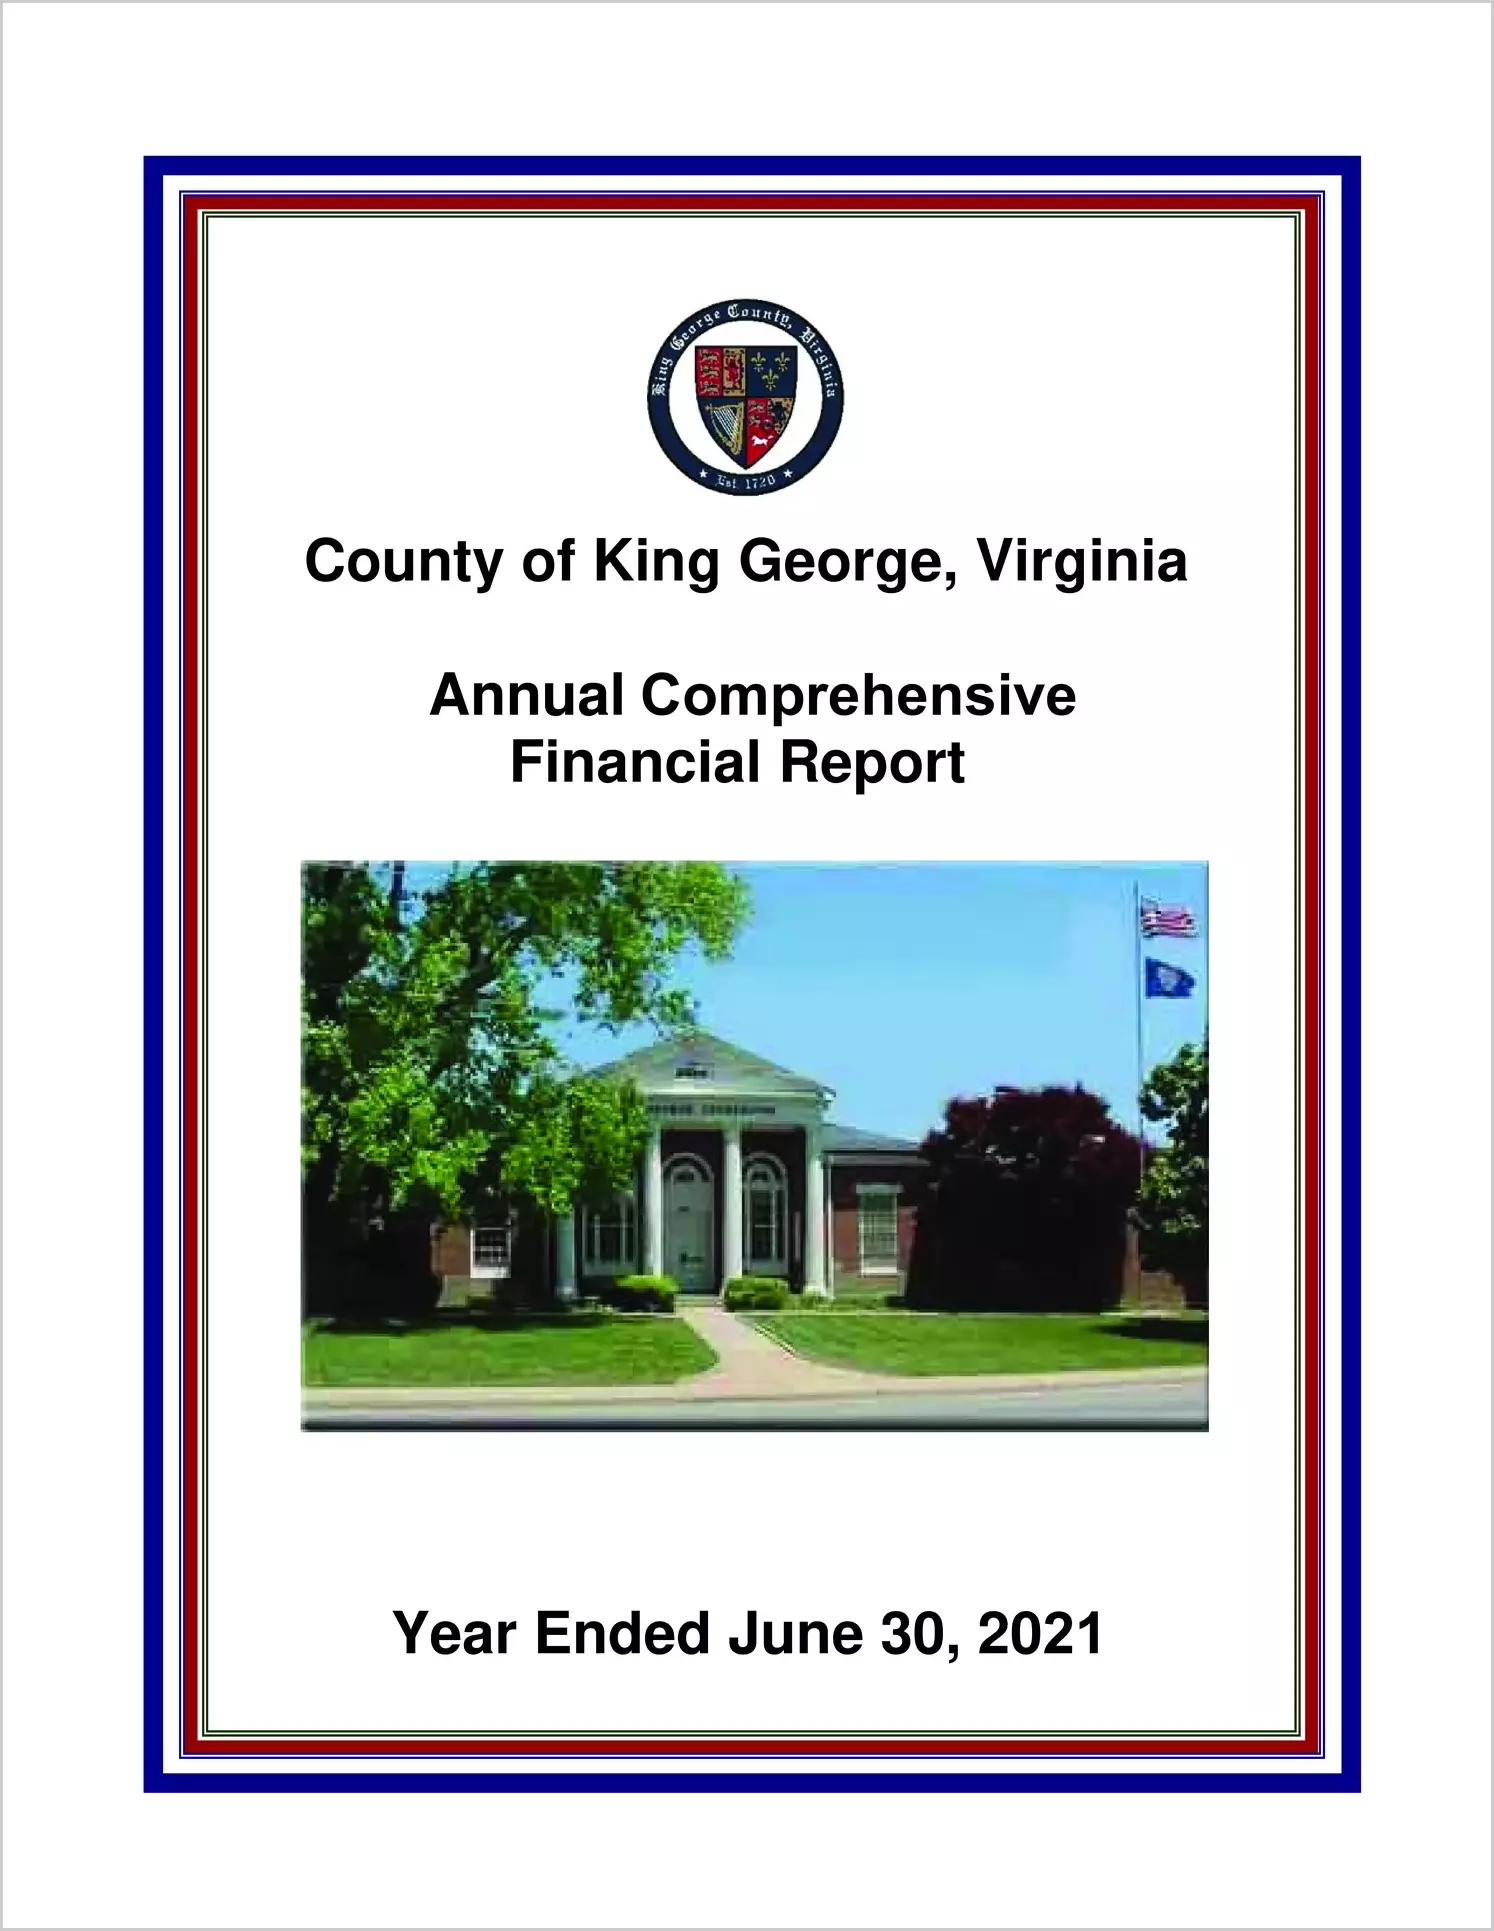 2021 Annual Financial Report for County of King George